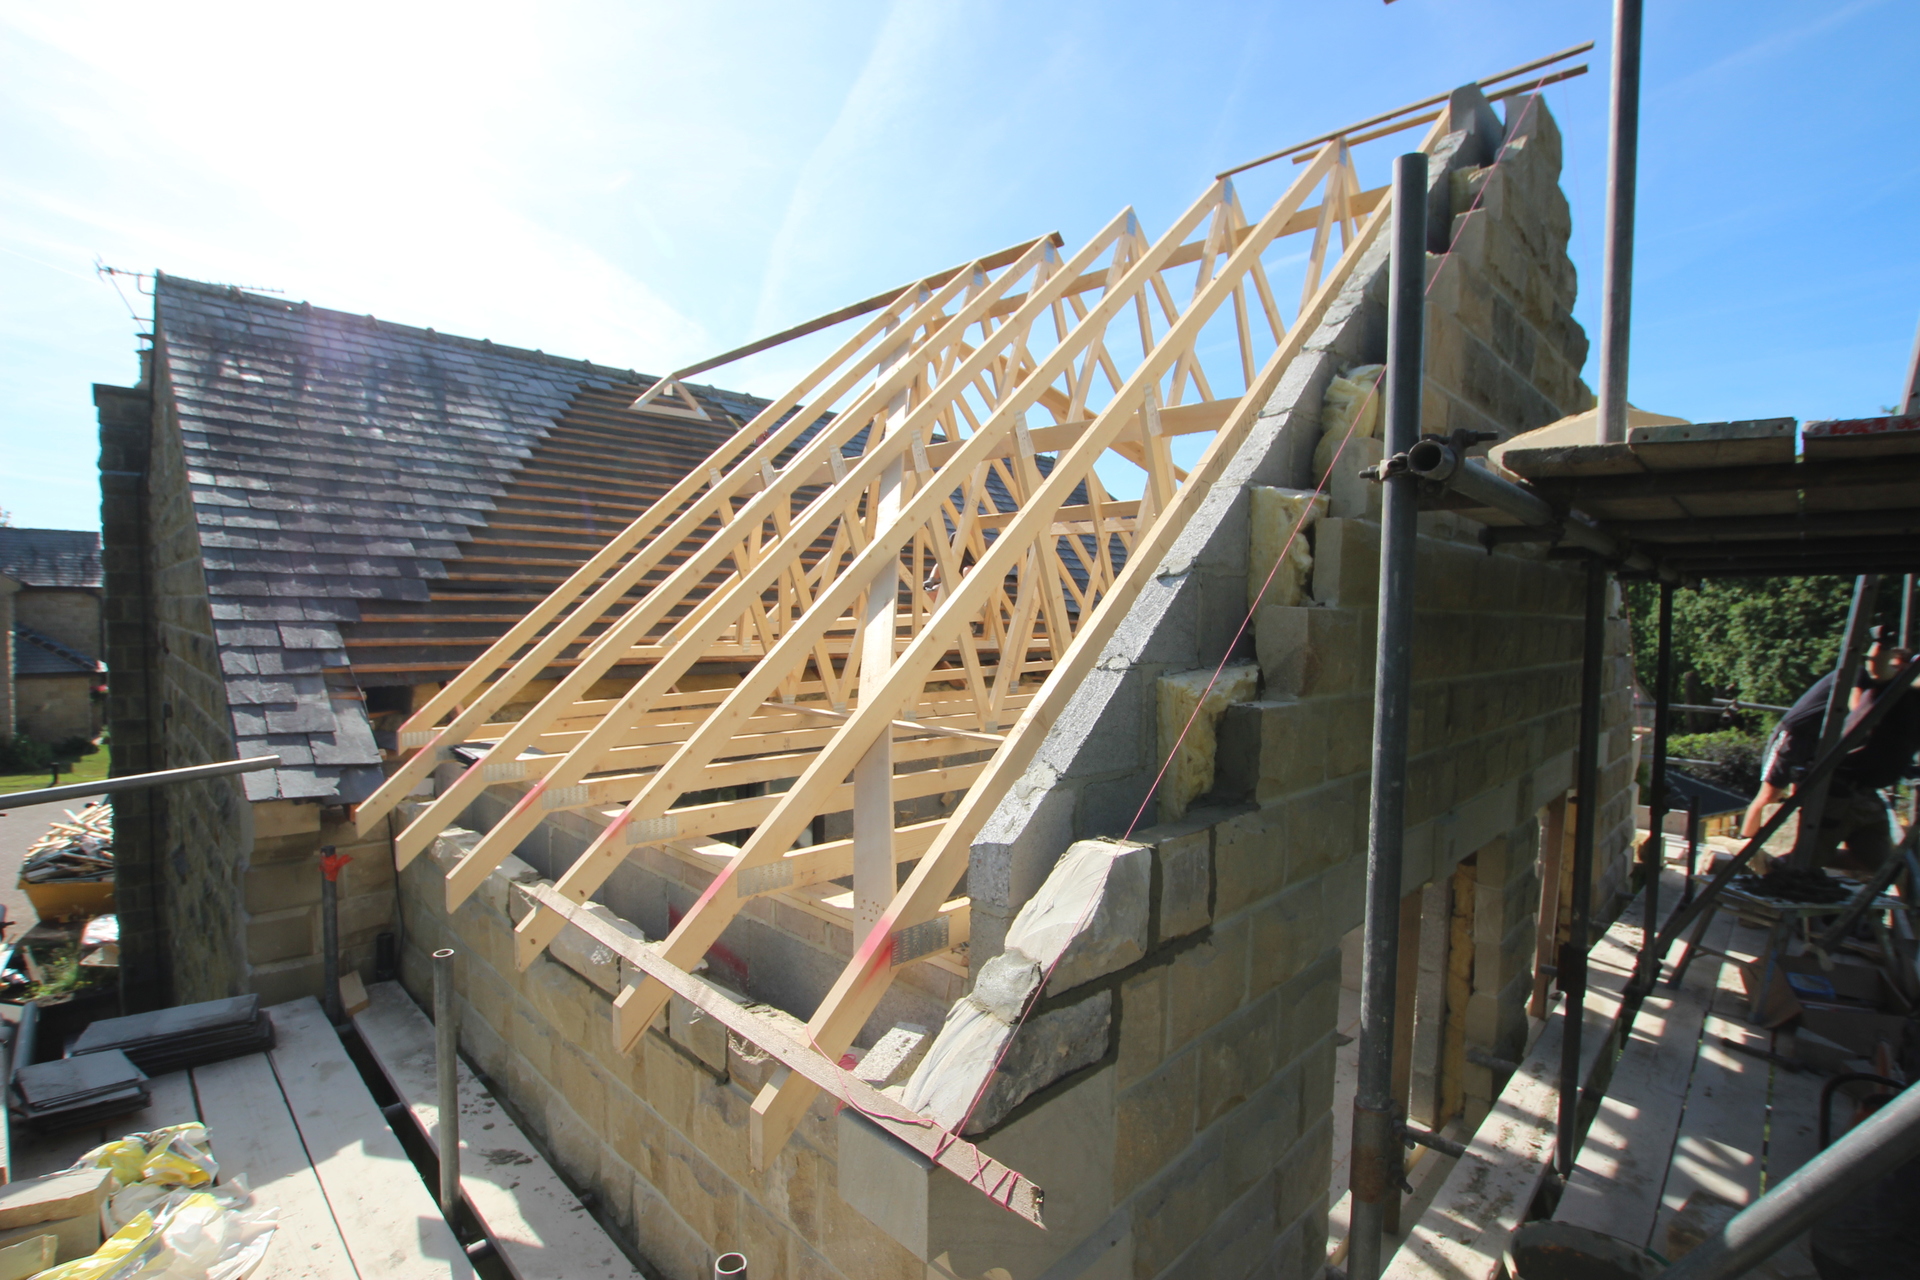 Roof trusses in place